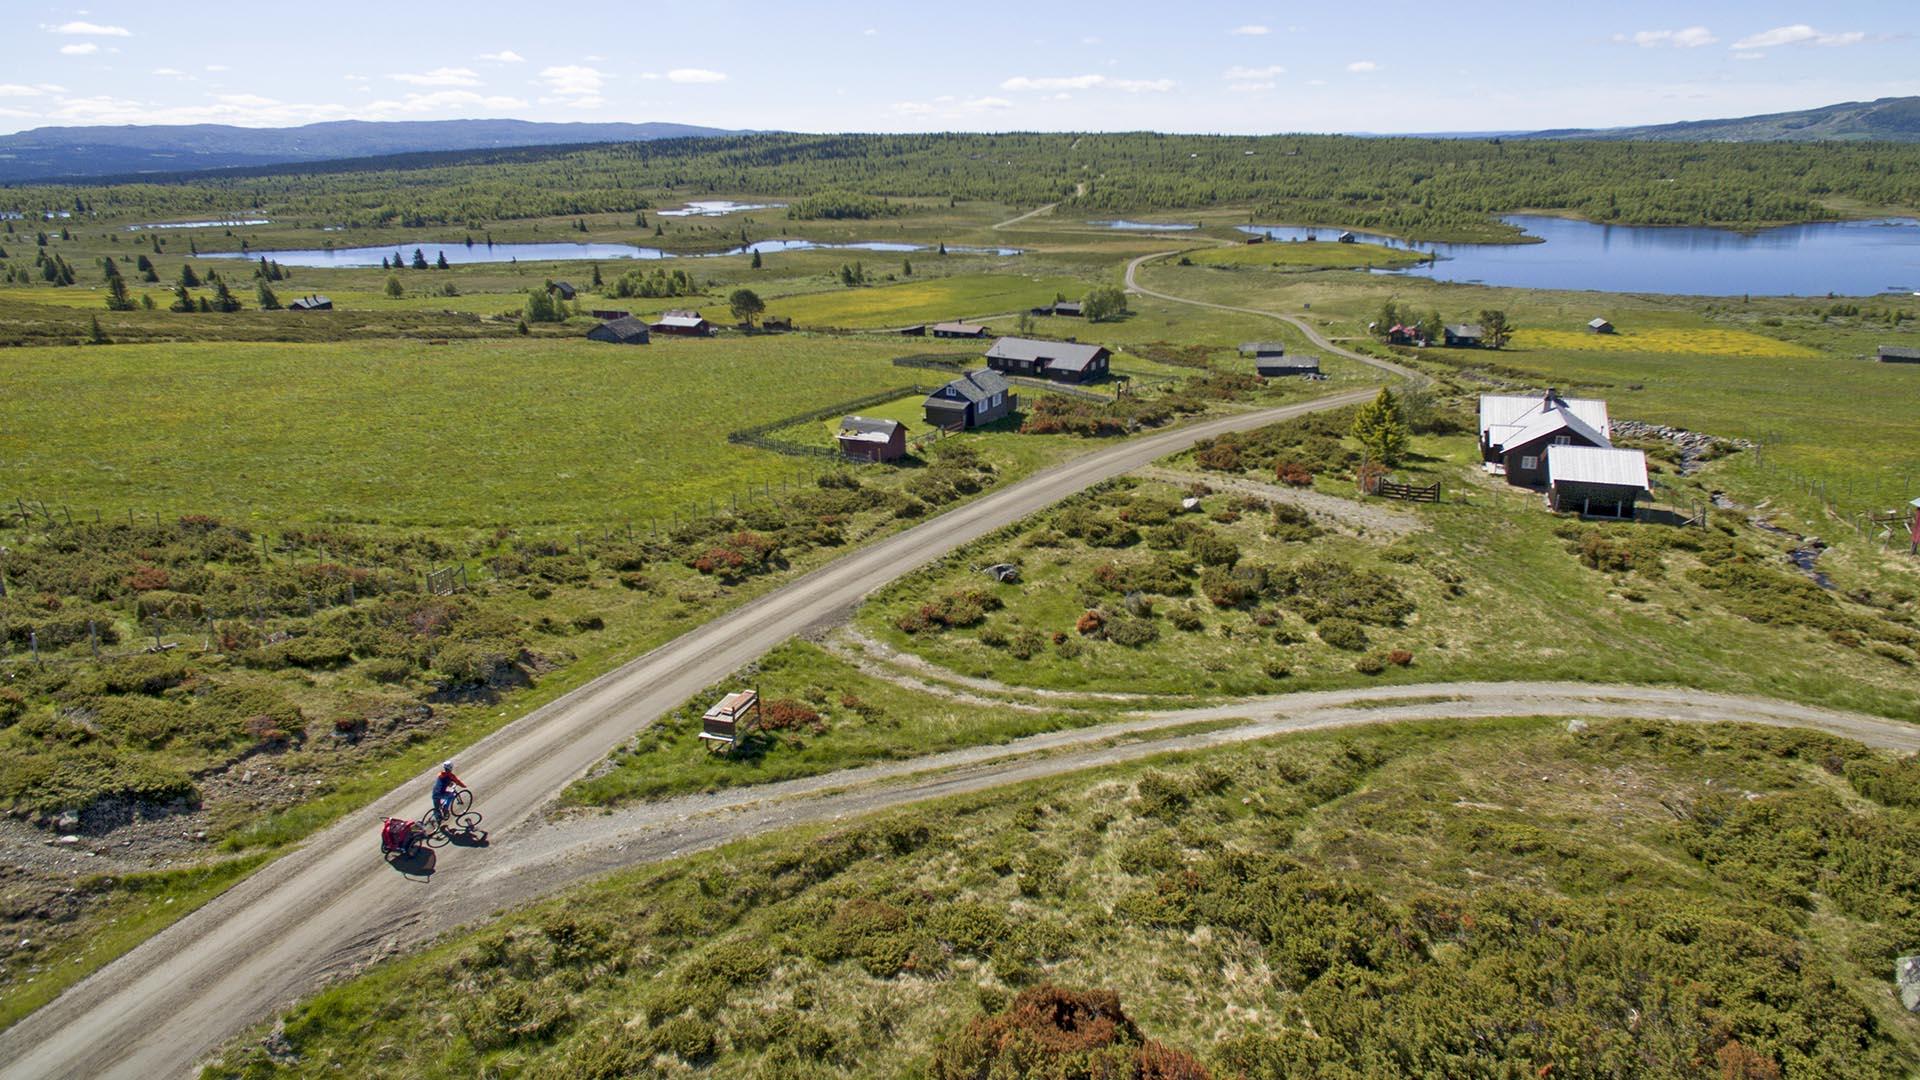 Drone image of a cyclist with trailer on a gravel road over an open high plateau with green pastures and some bushes. In the background a couple of small lakes.